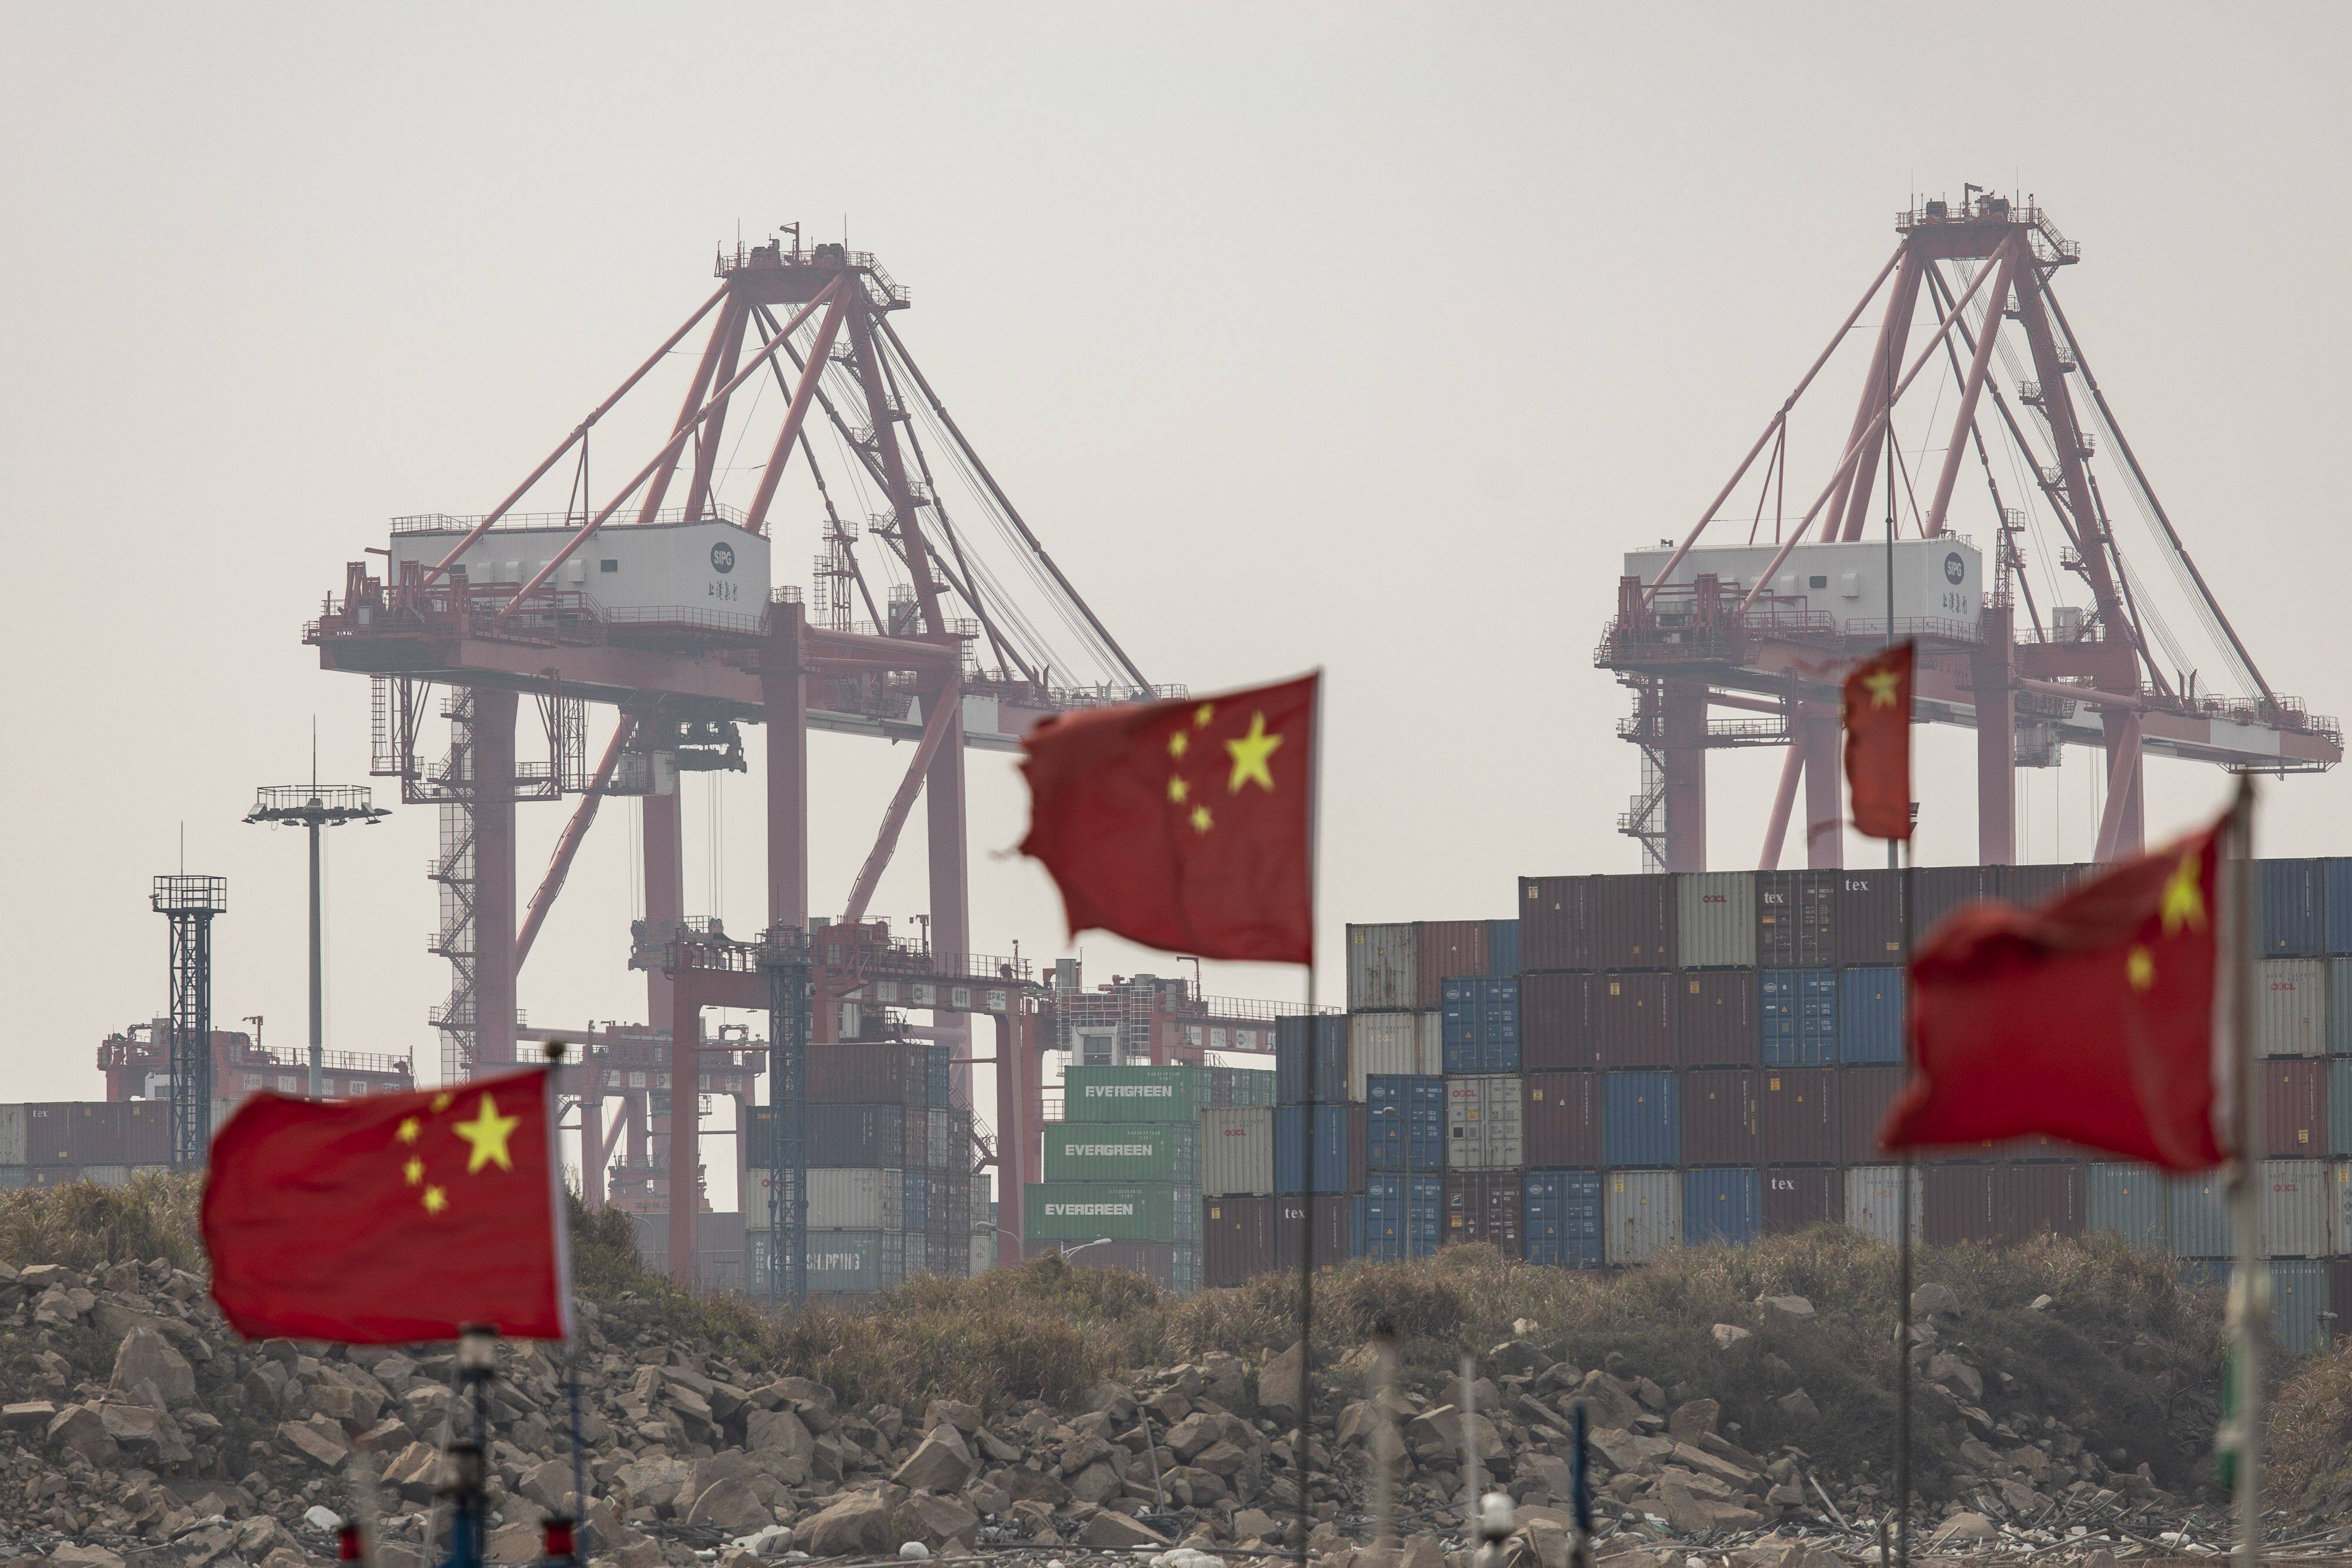 Shipping containers seen beyond Chinese flags on fishing boats near the Yangshan Deepwater Port in Shanghai, China. Photo: Bloomberg